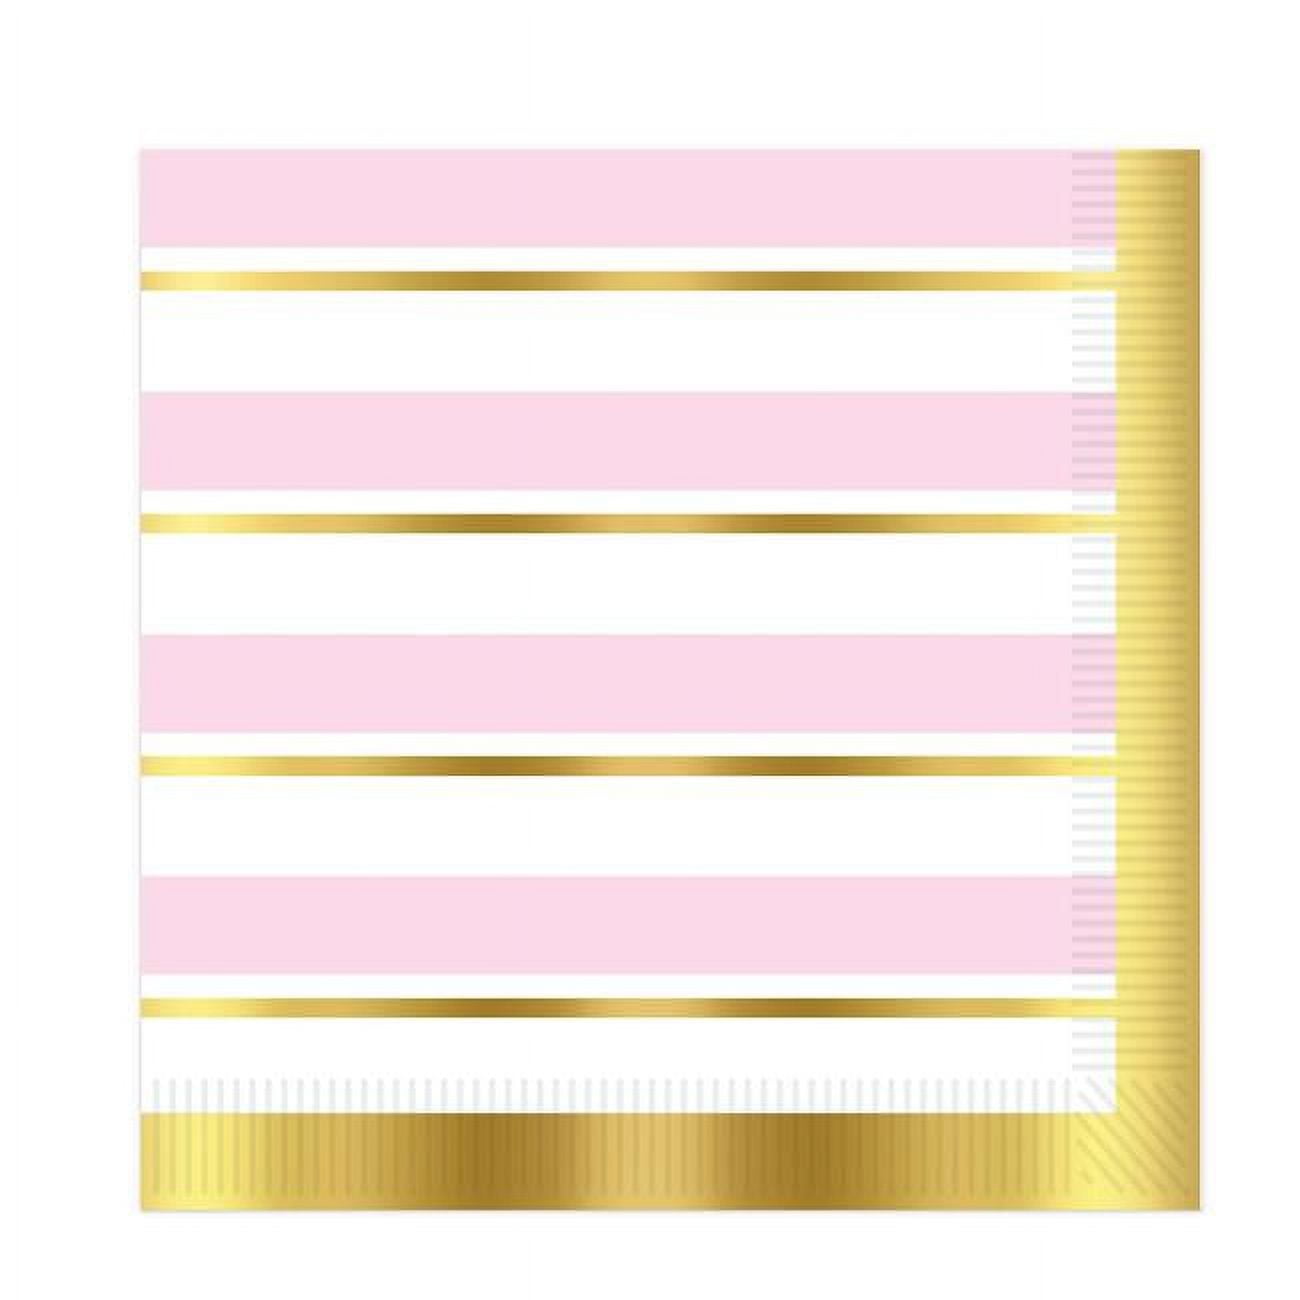 Picture of Beistle 53705 Striped Luncheon Napkins